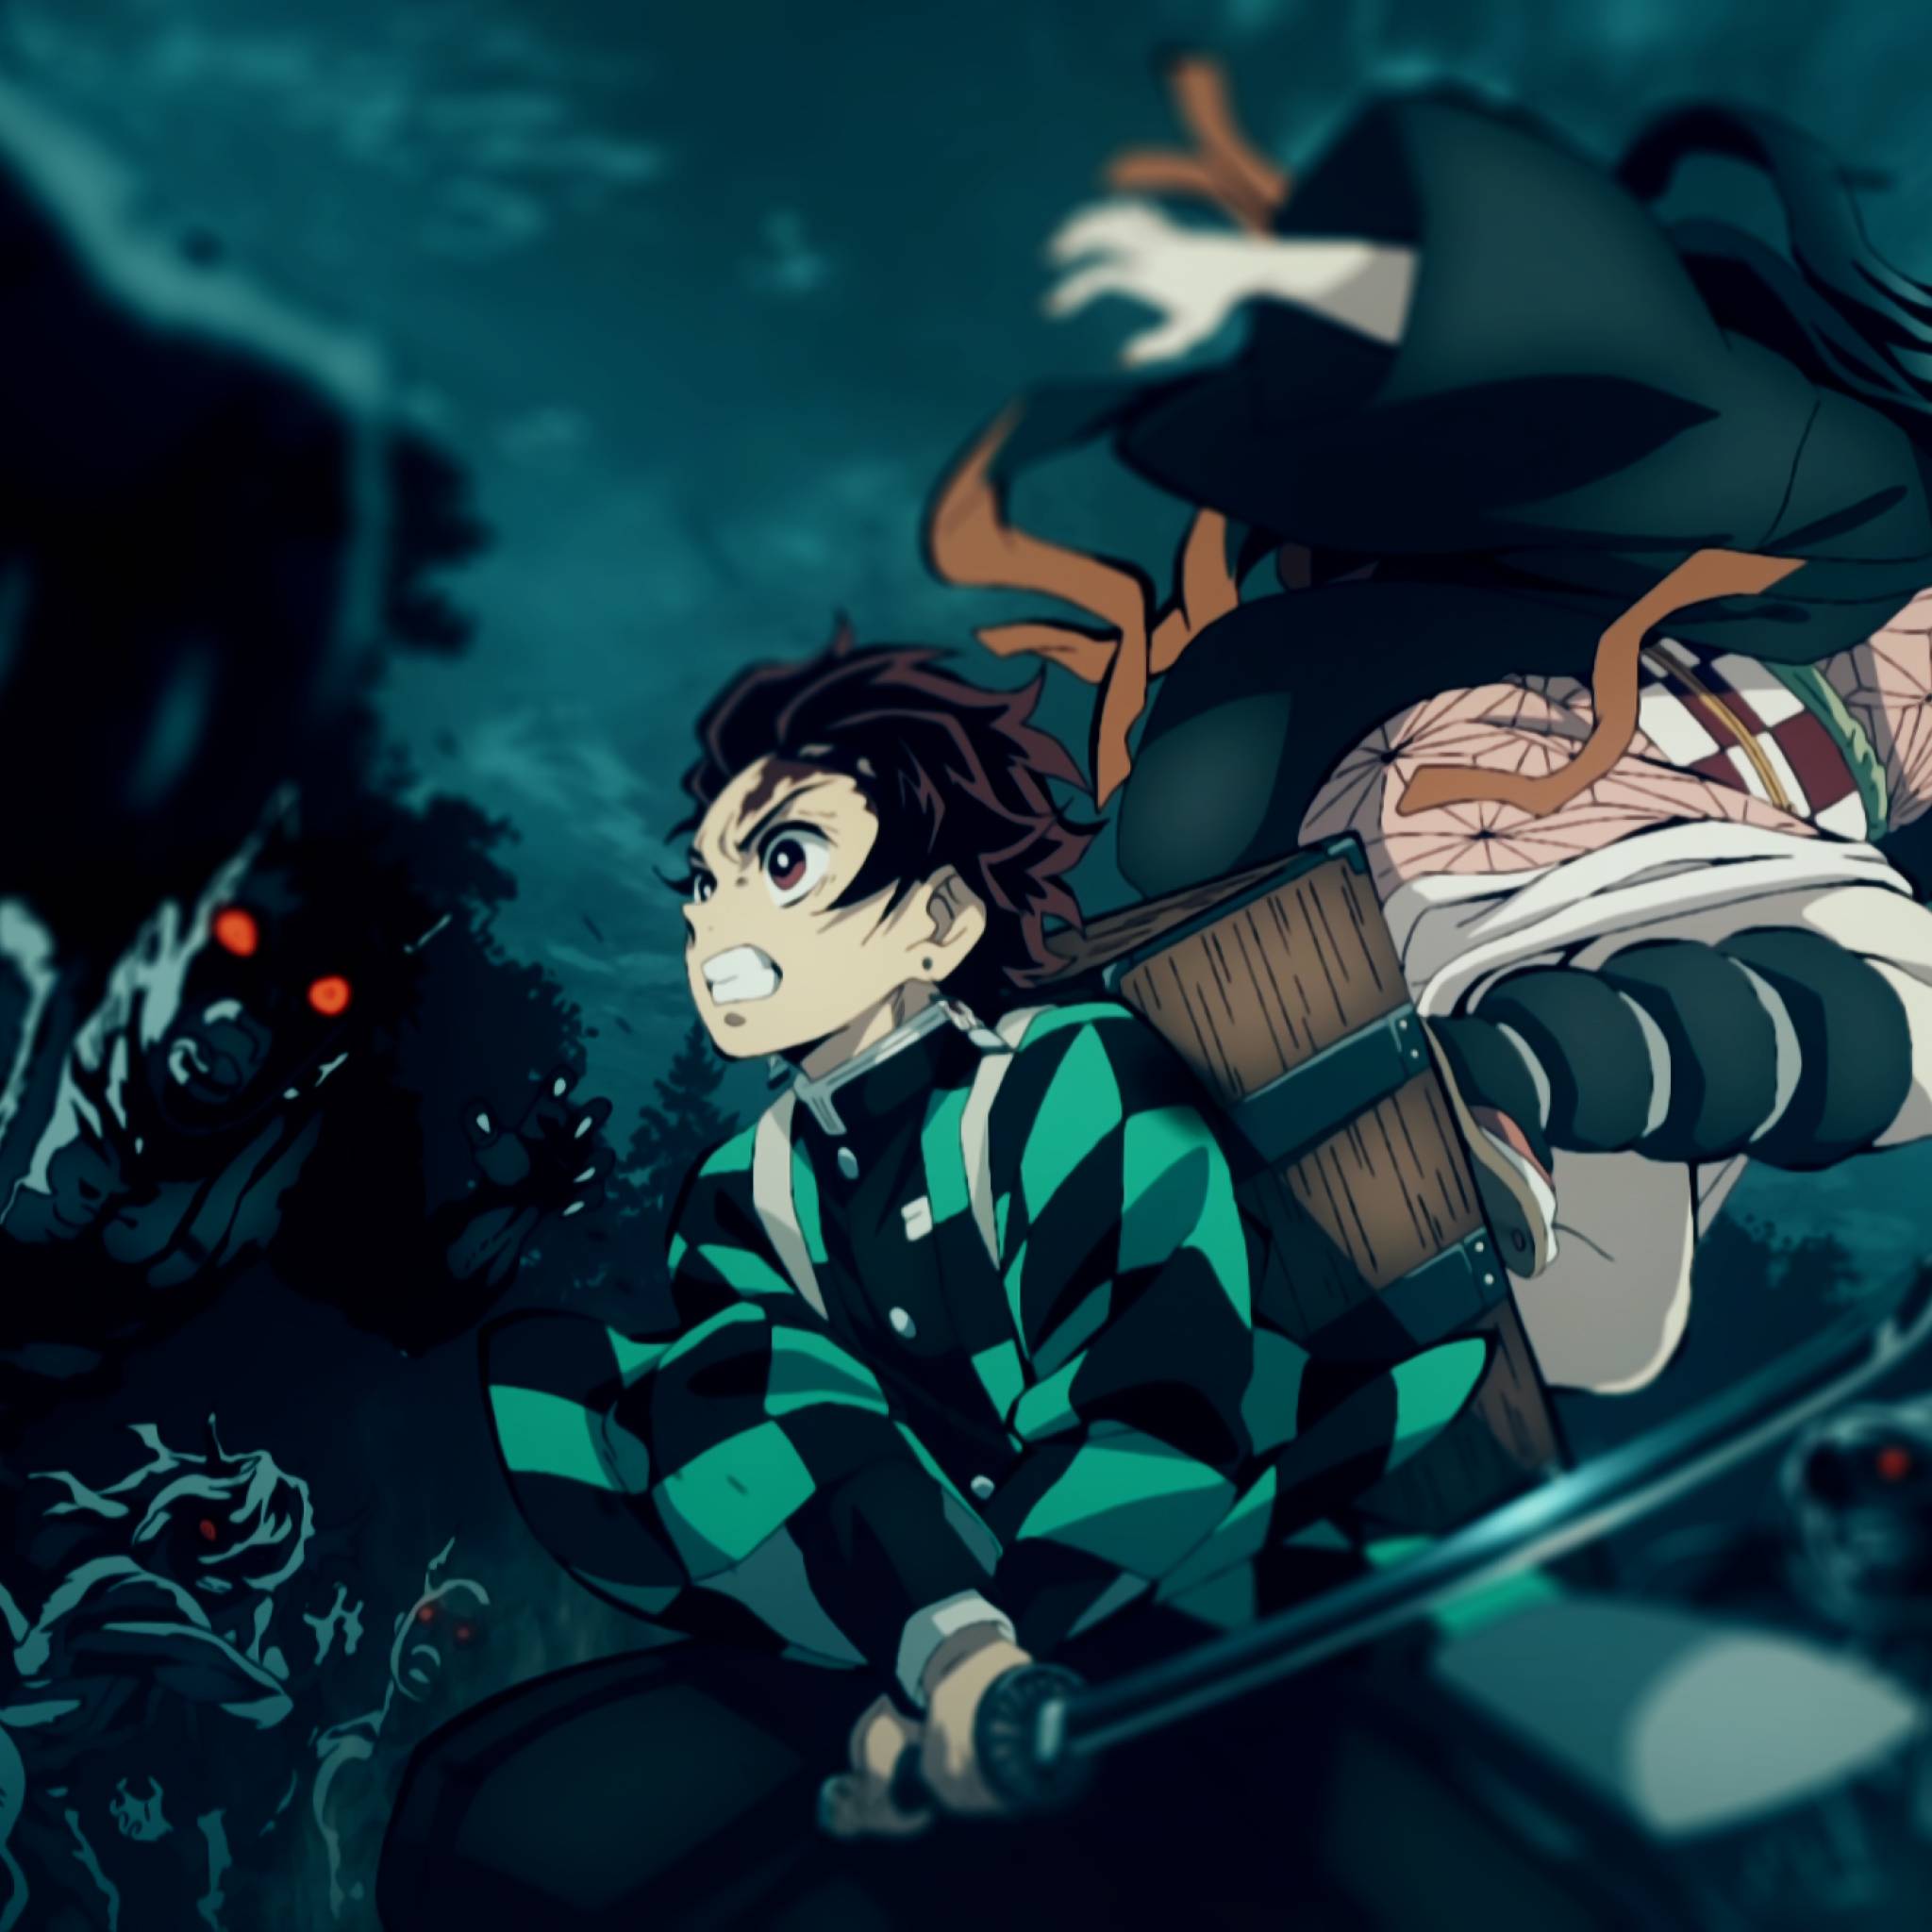 Demon Slayer Kimetsu no Yaiba wallpaper 2560x1440. This is a high resolution wallpaper of the popular anime Demon Slayer Kimetsu no Yaiba. The image features the main character, Tanjiro, riding on a cart with his sister Nezuko in the back. - Nezuko